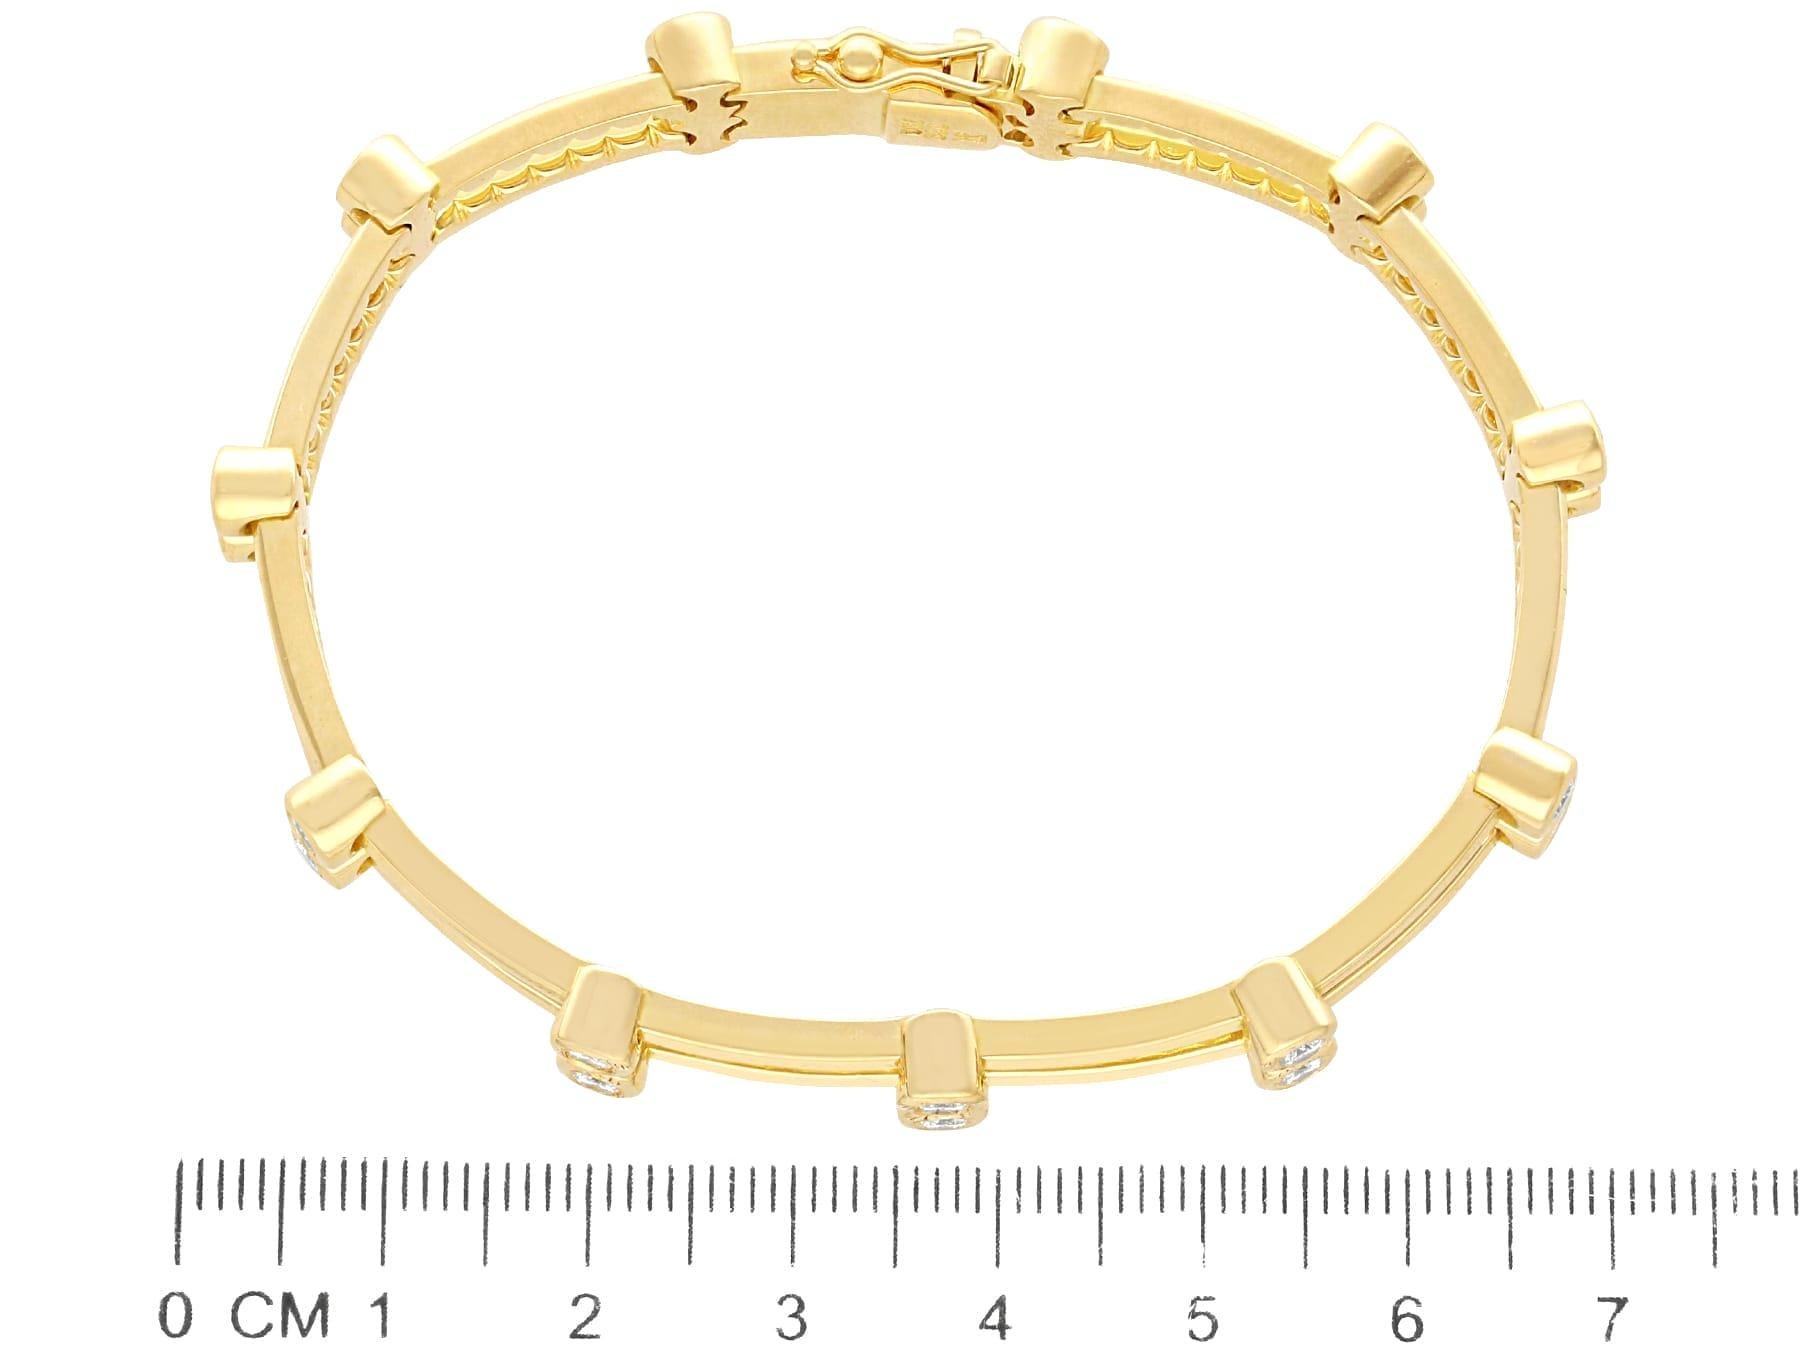 Vintage 2 Carat Diamond and Yellow Gold Bracelet For Sale 2